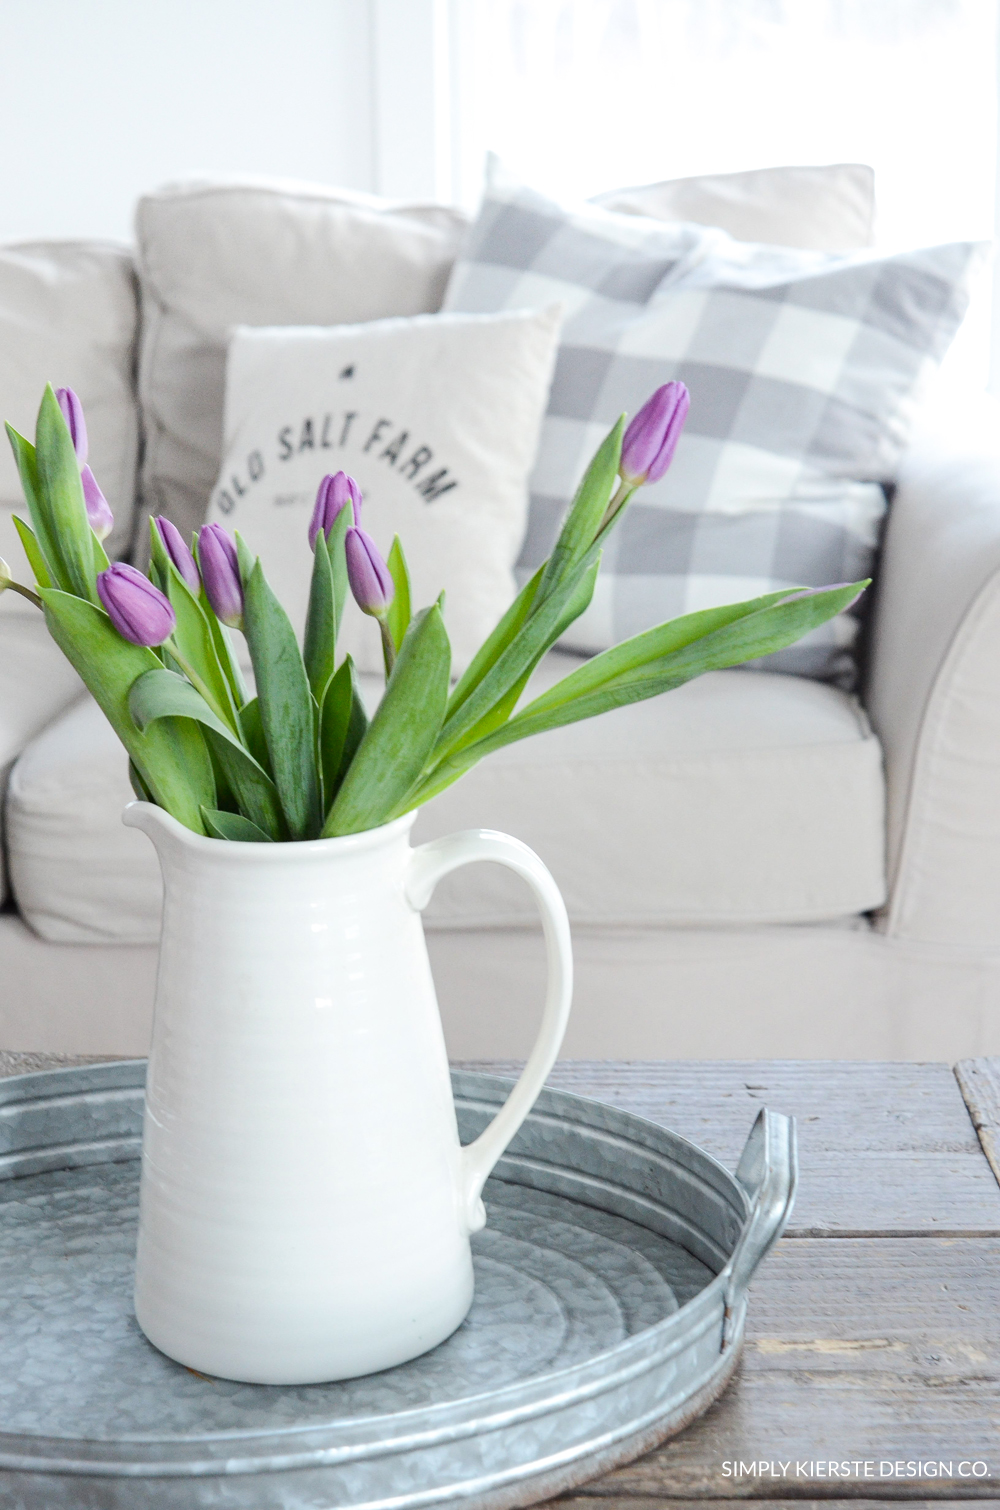 Decorating with Flowers for Spring | oldsaltfarm.com